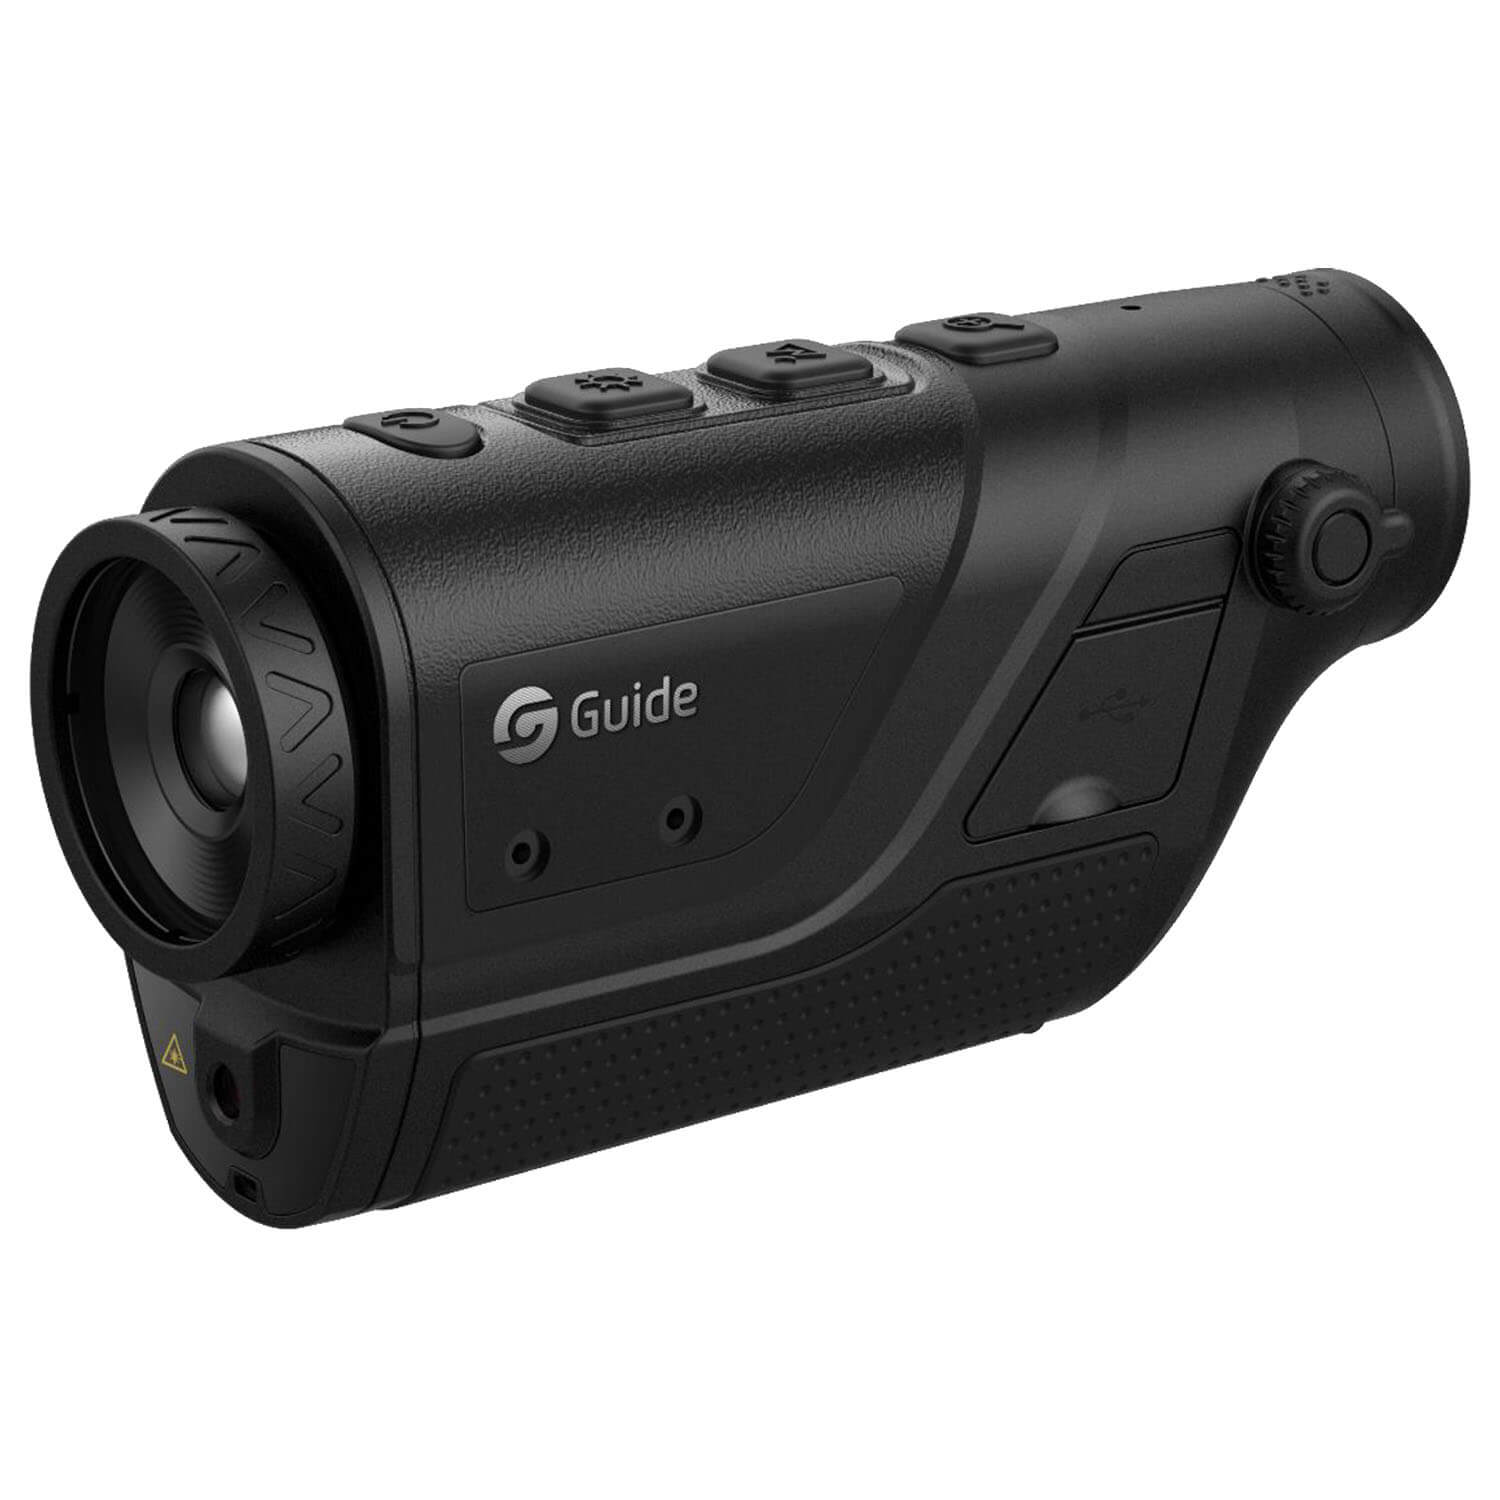 Guide sensmart thermal imagine device TD 210 - Night Vision Devices